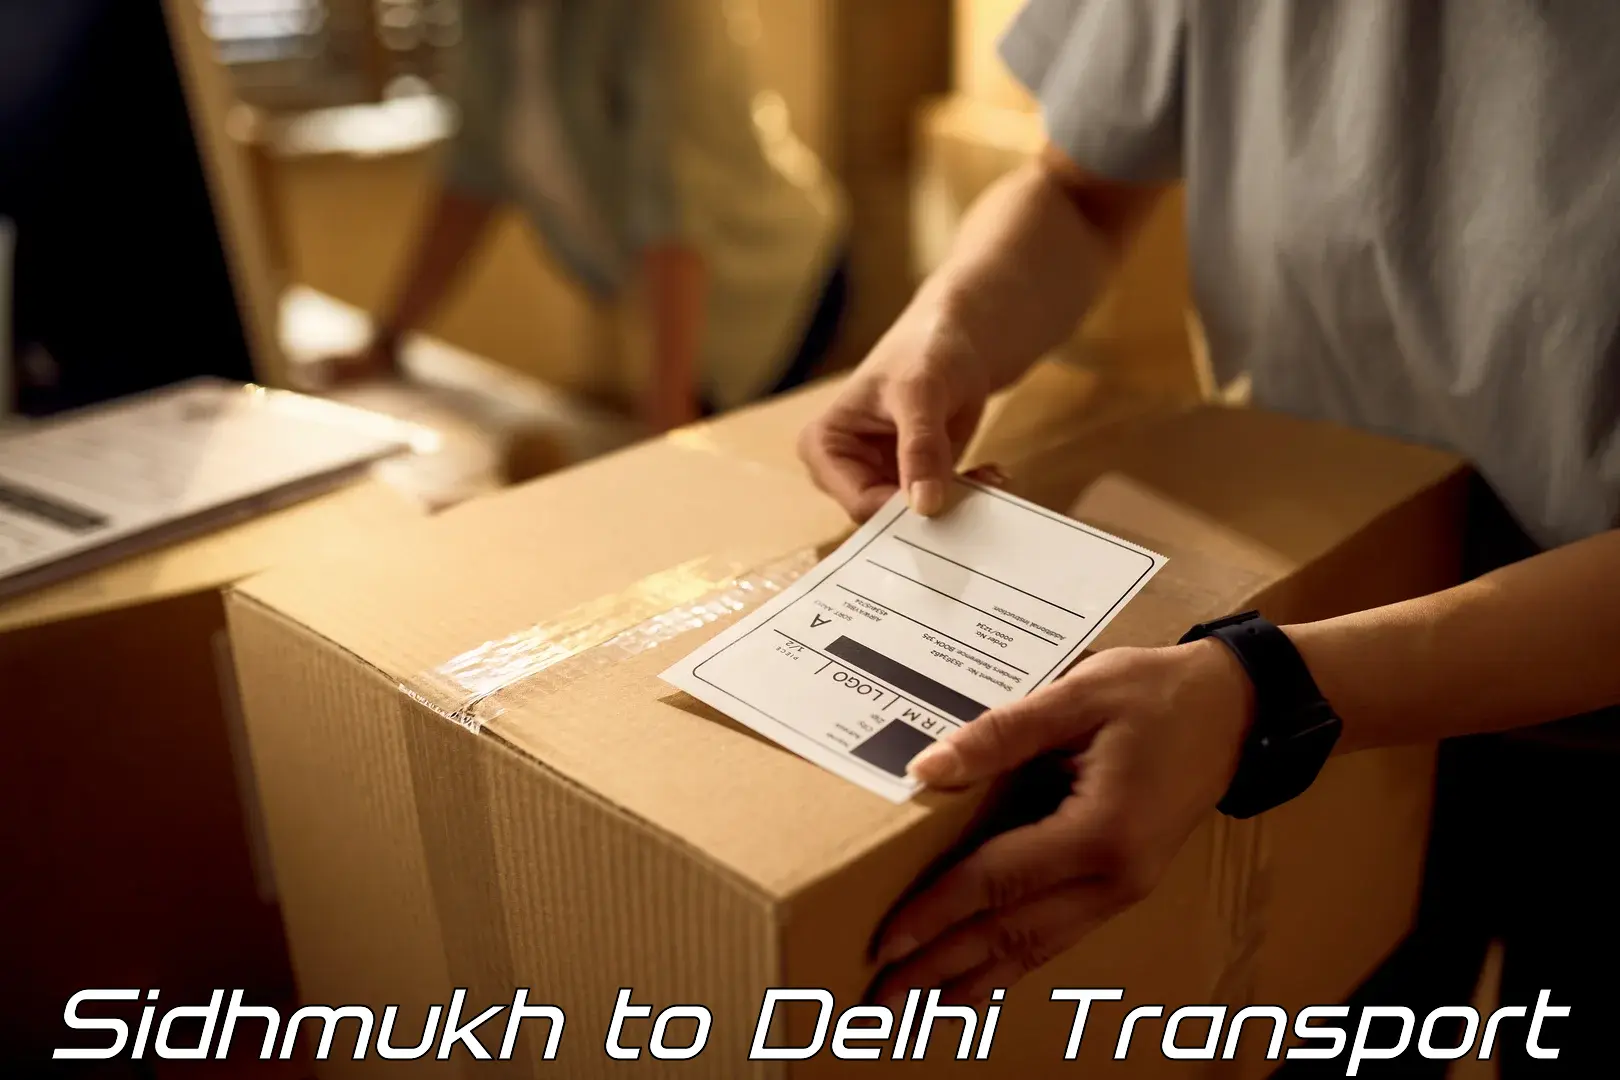 Daily transport service Sidhmukh to East Delhi